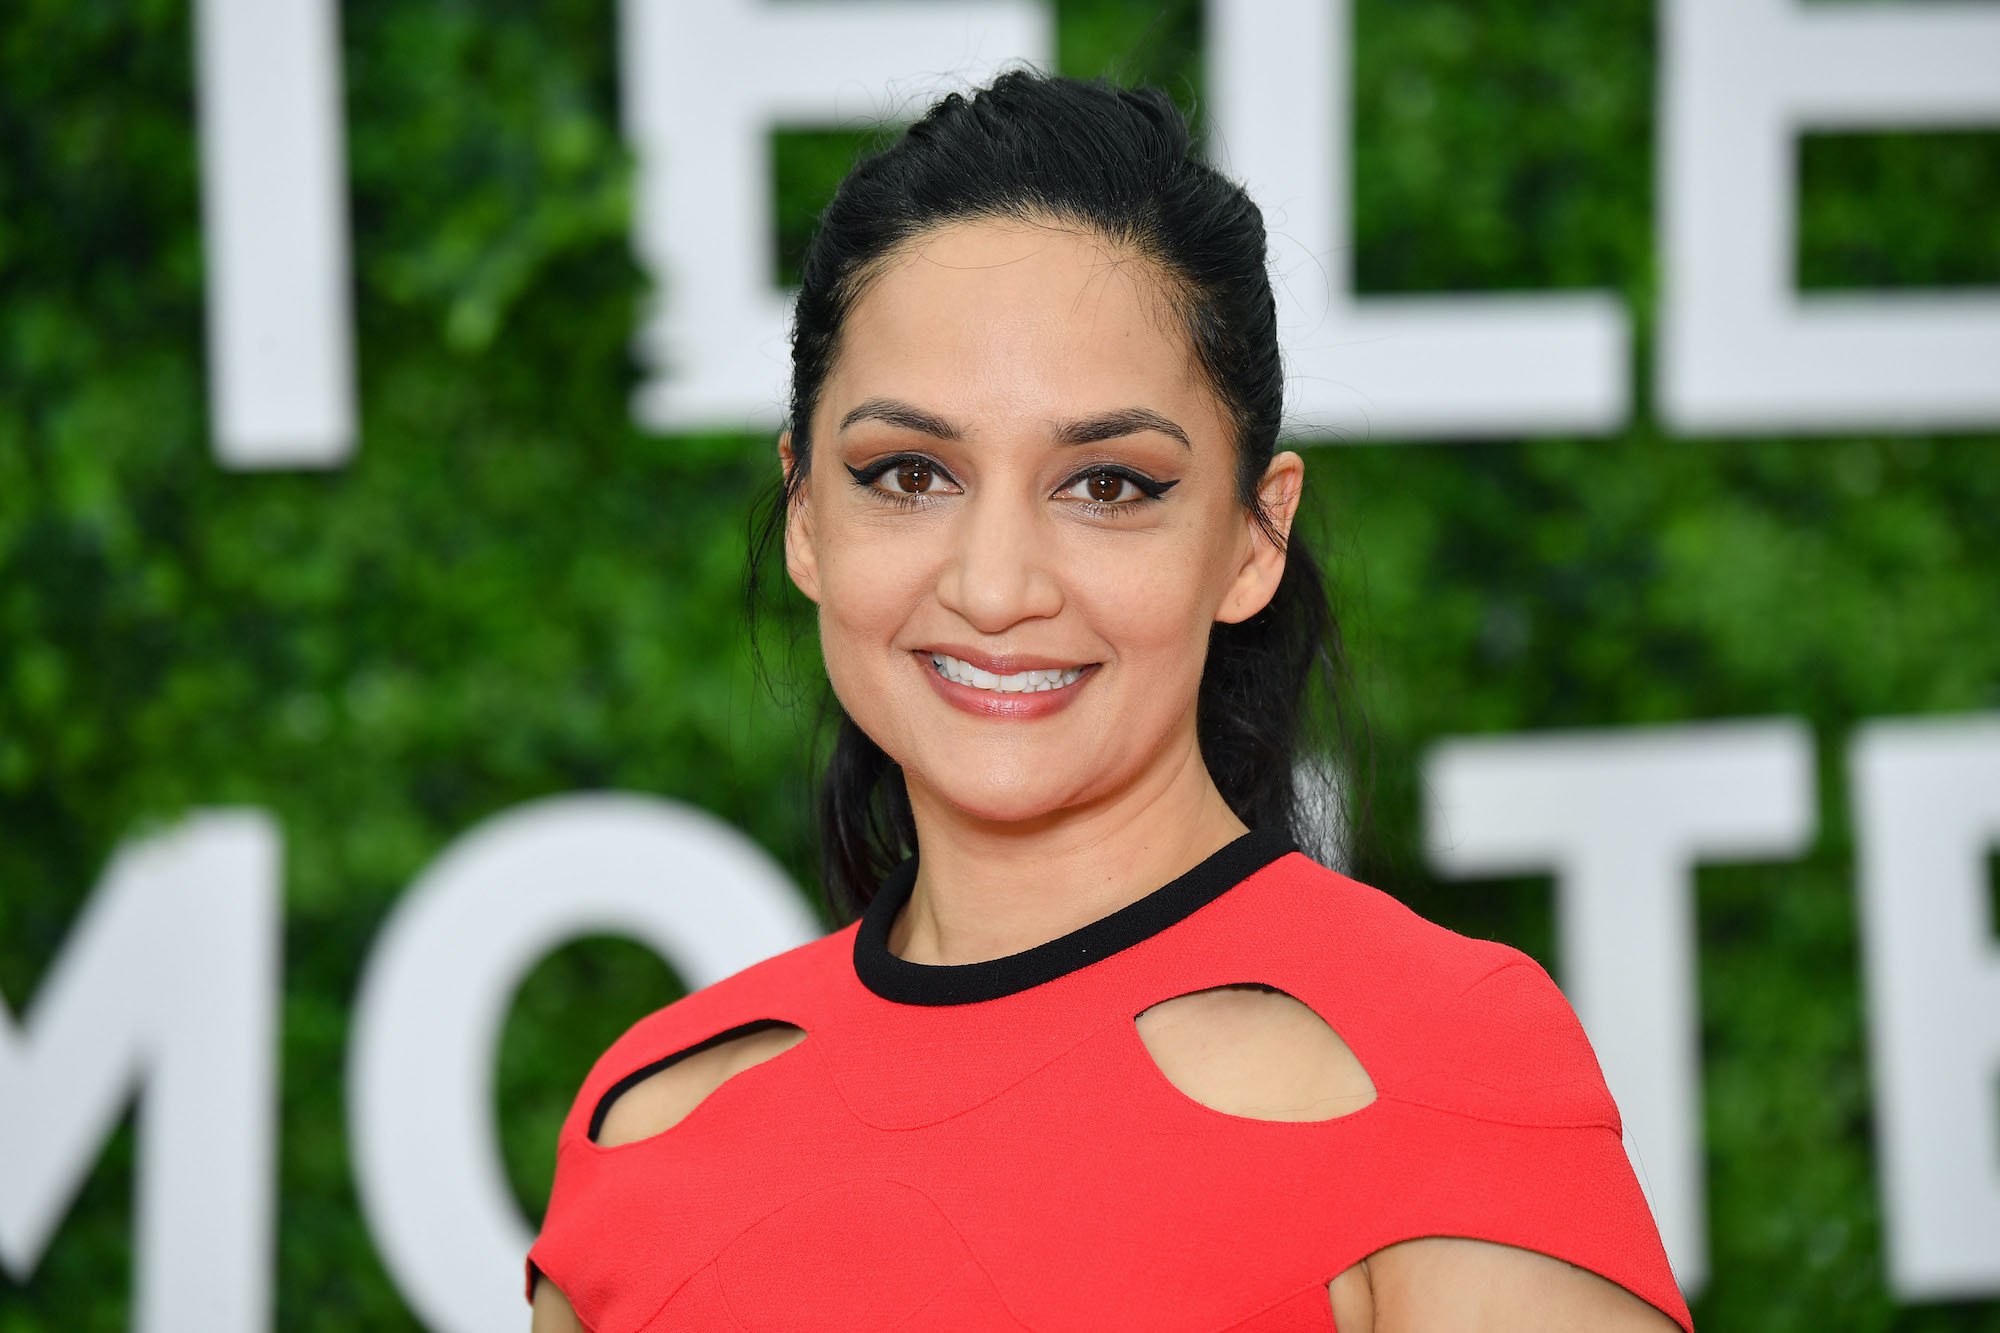 ‘The Good Wife’: Where Is Archie Panjabi Now?